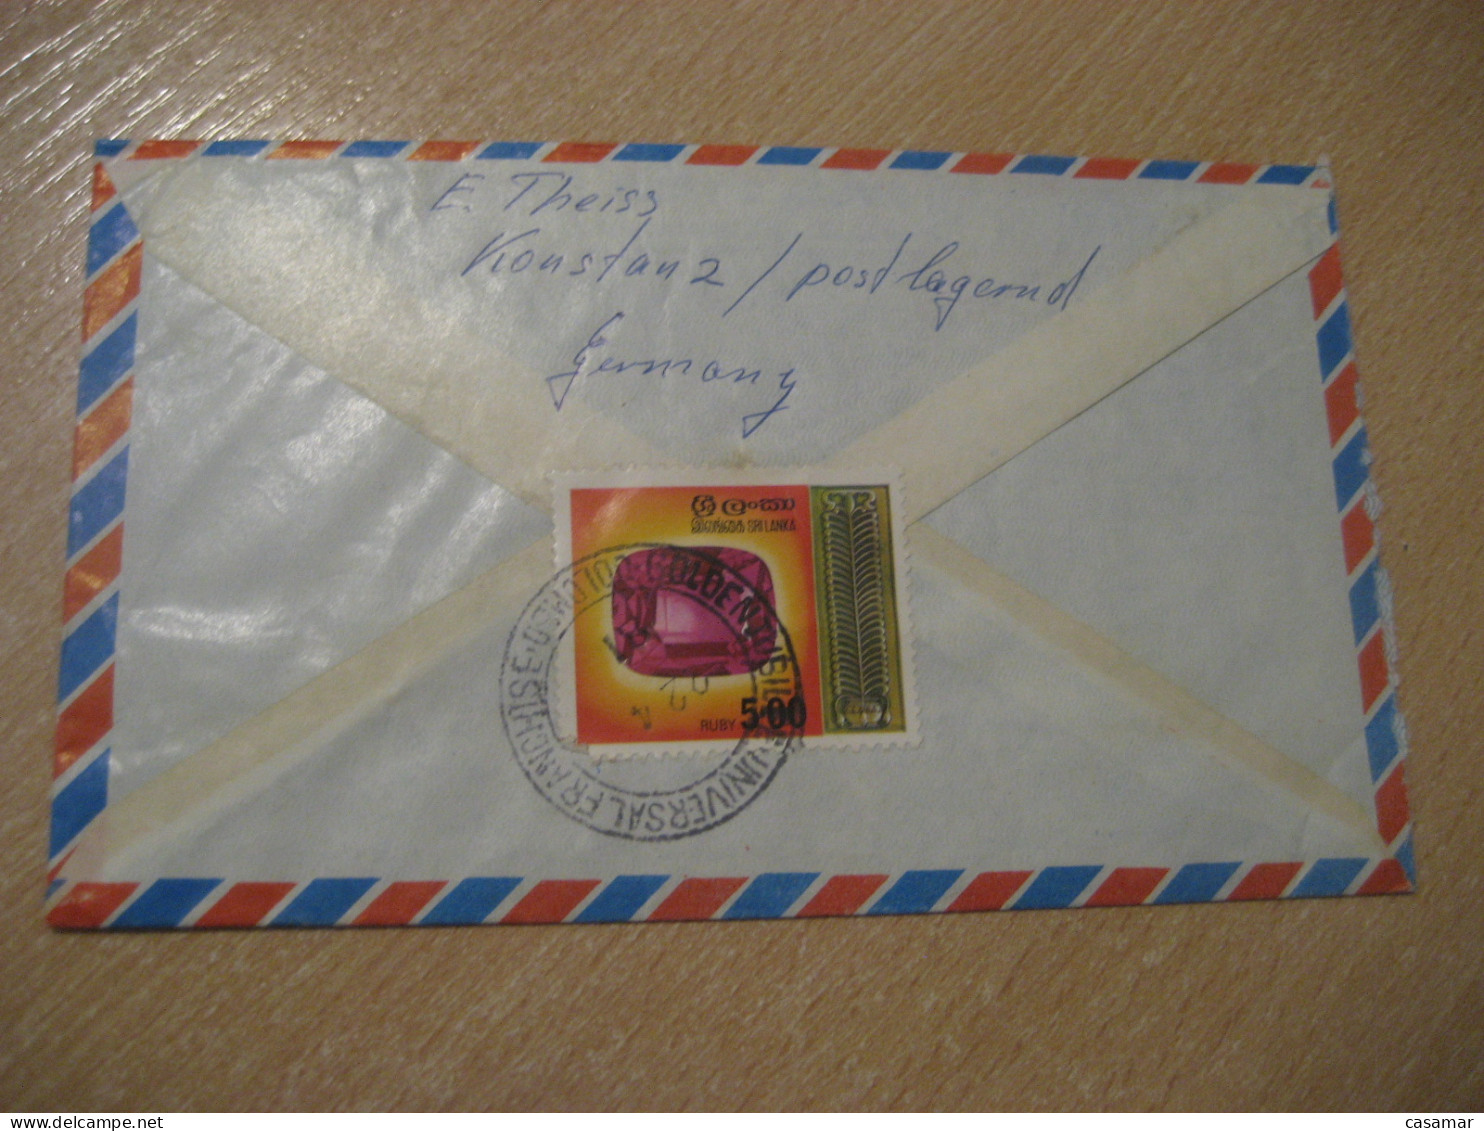 COLOMBO 1981 To Sollentuna Sweden RUBY Mineral Minerals Cancel Cover SRI LANKA Mineraux Geology - Minerals